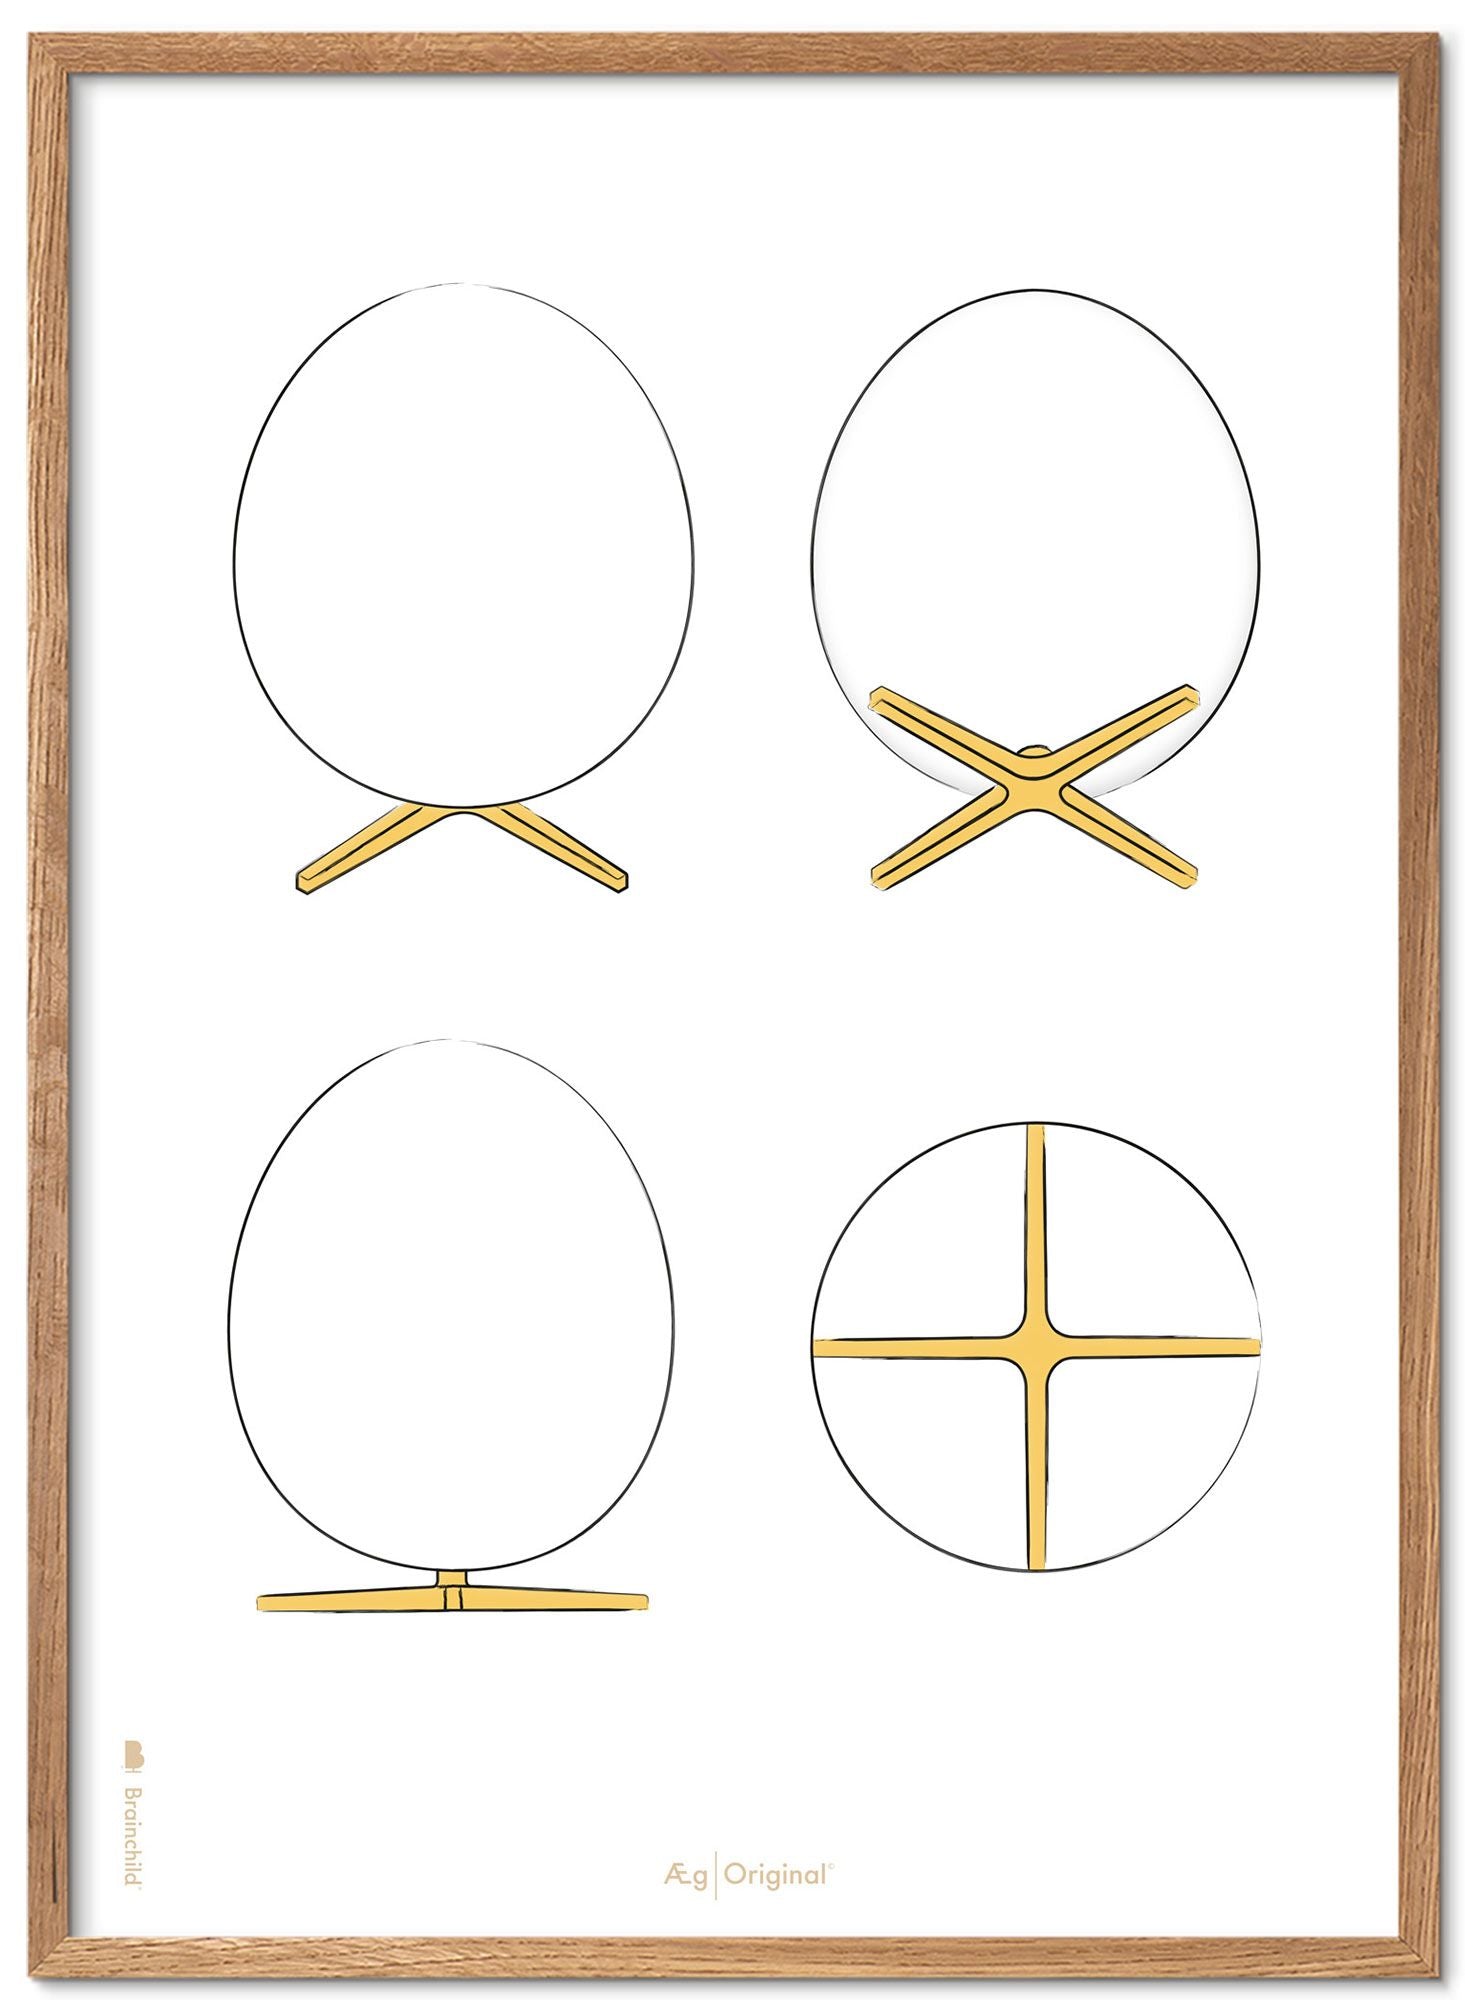 Brainchild The Egg Design Sketches Poster Frame Made Of Light Wood A5, White Background